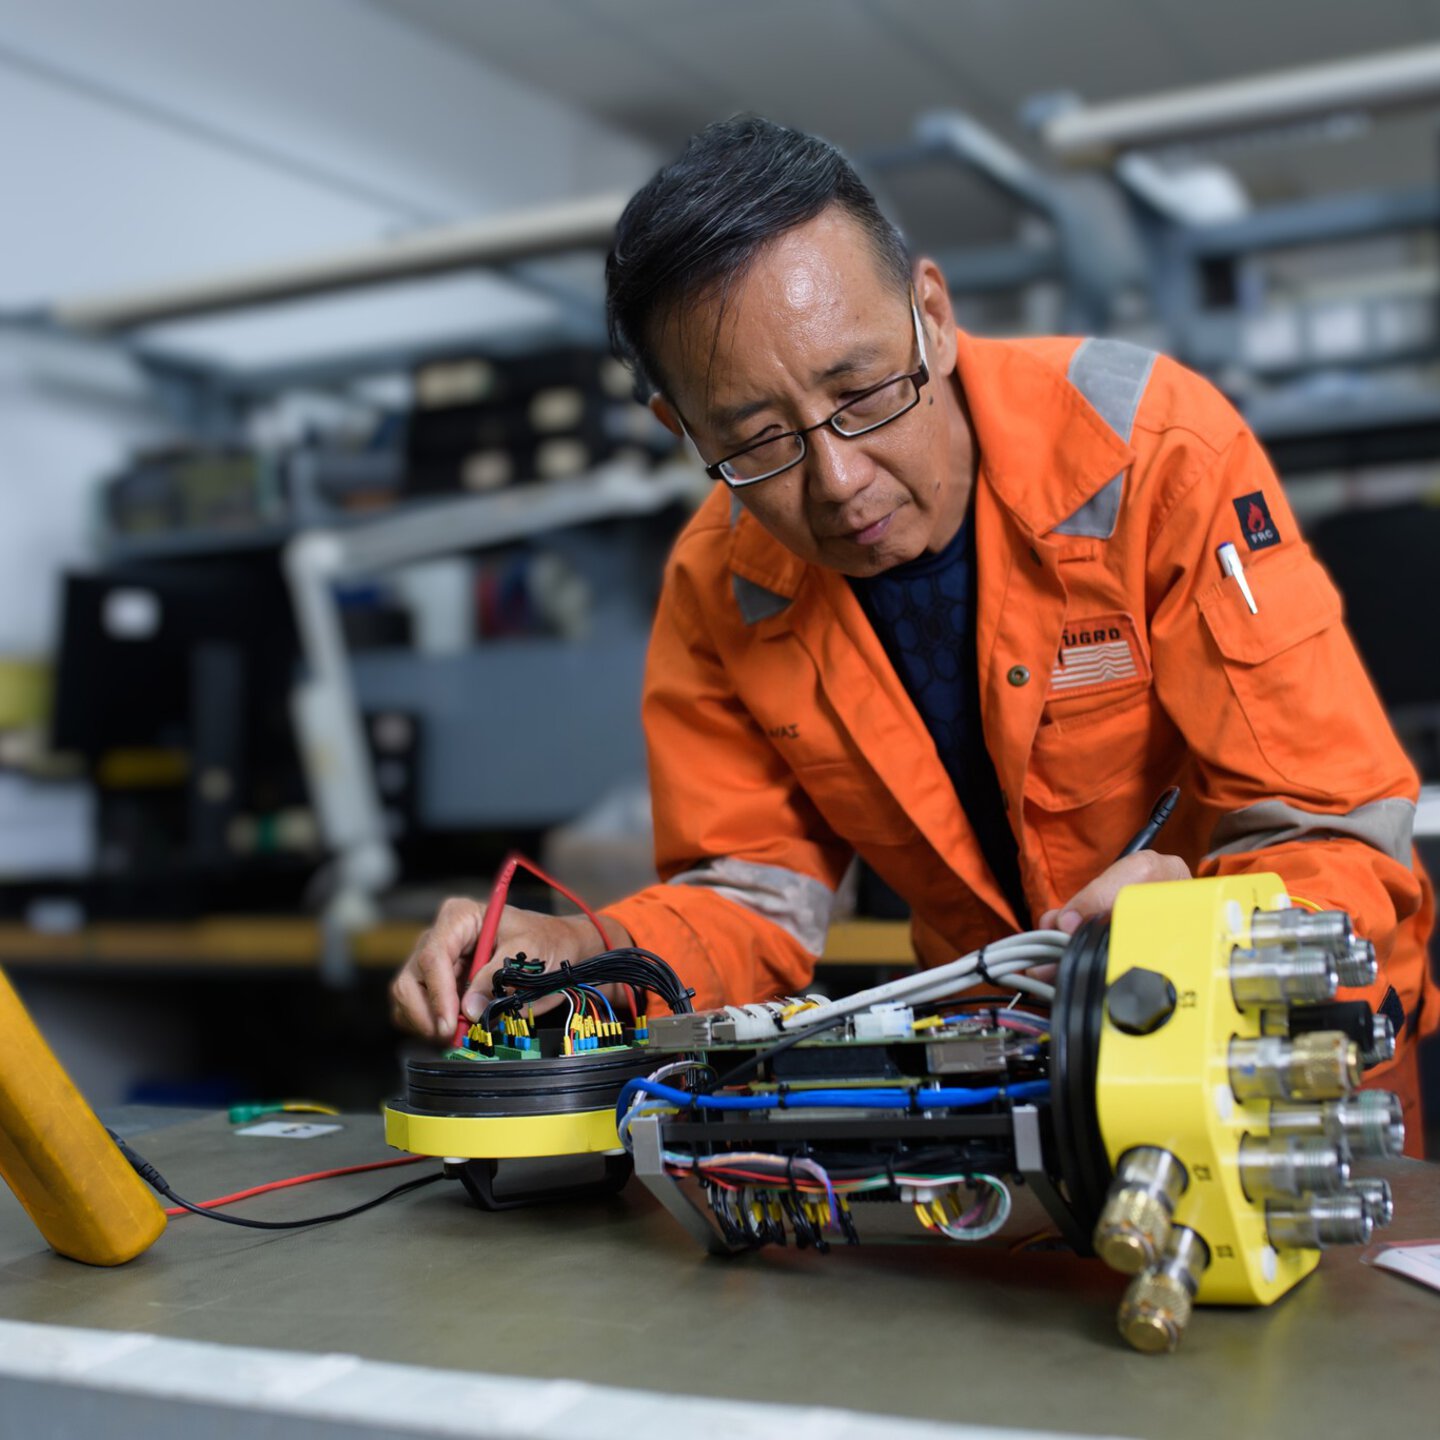 Singapore
Assembling and testing electrical components for the Blue Volta eROV